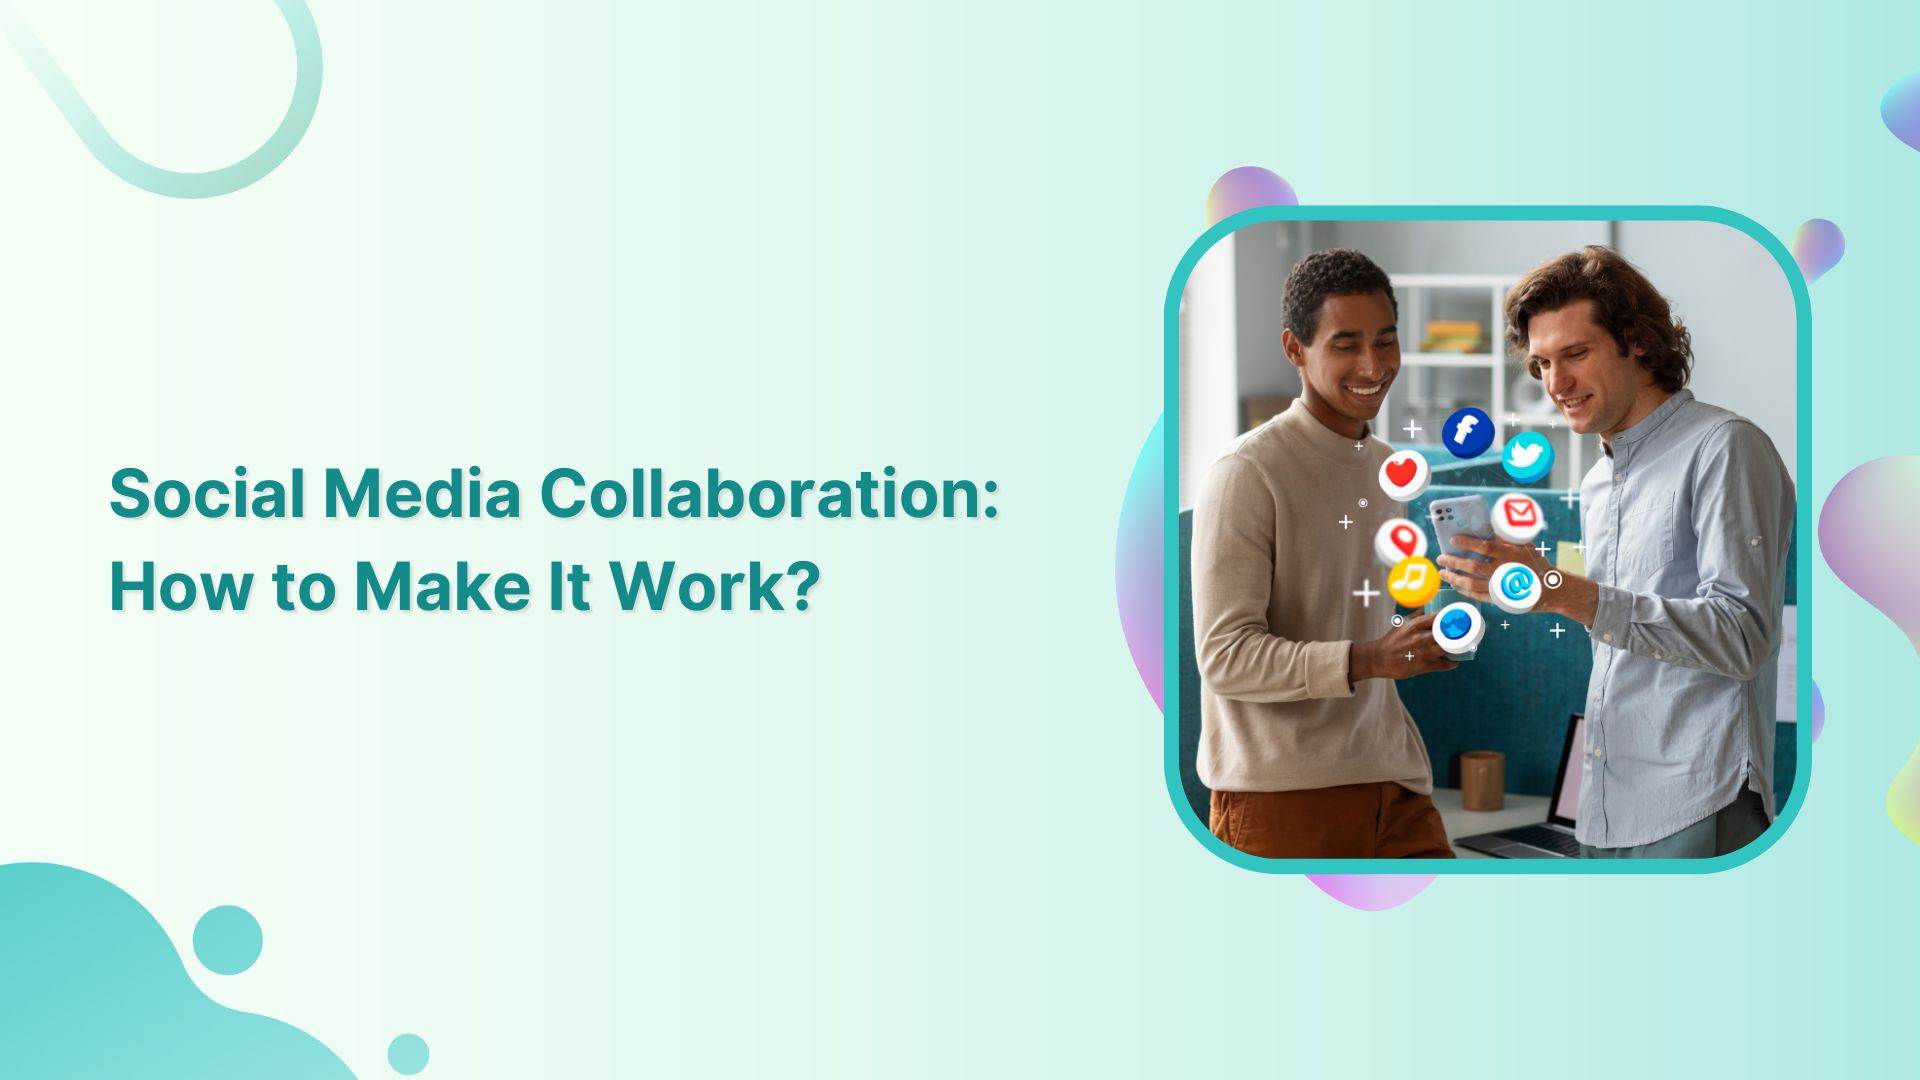 Social Media Collaboration: How to Make It Work?